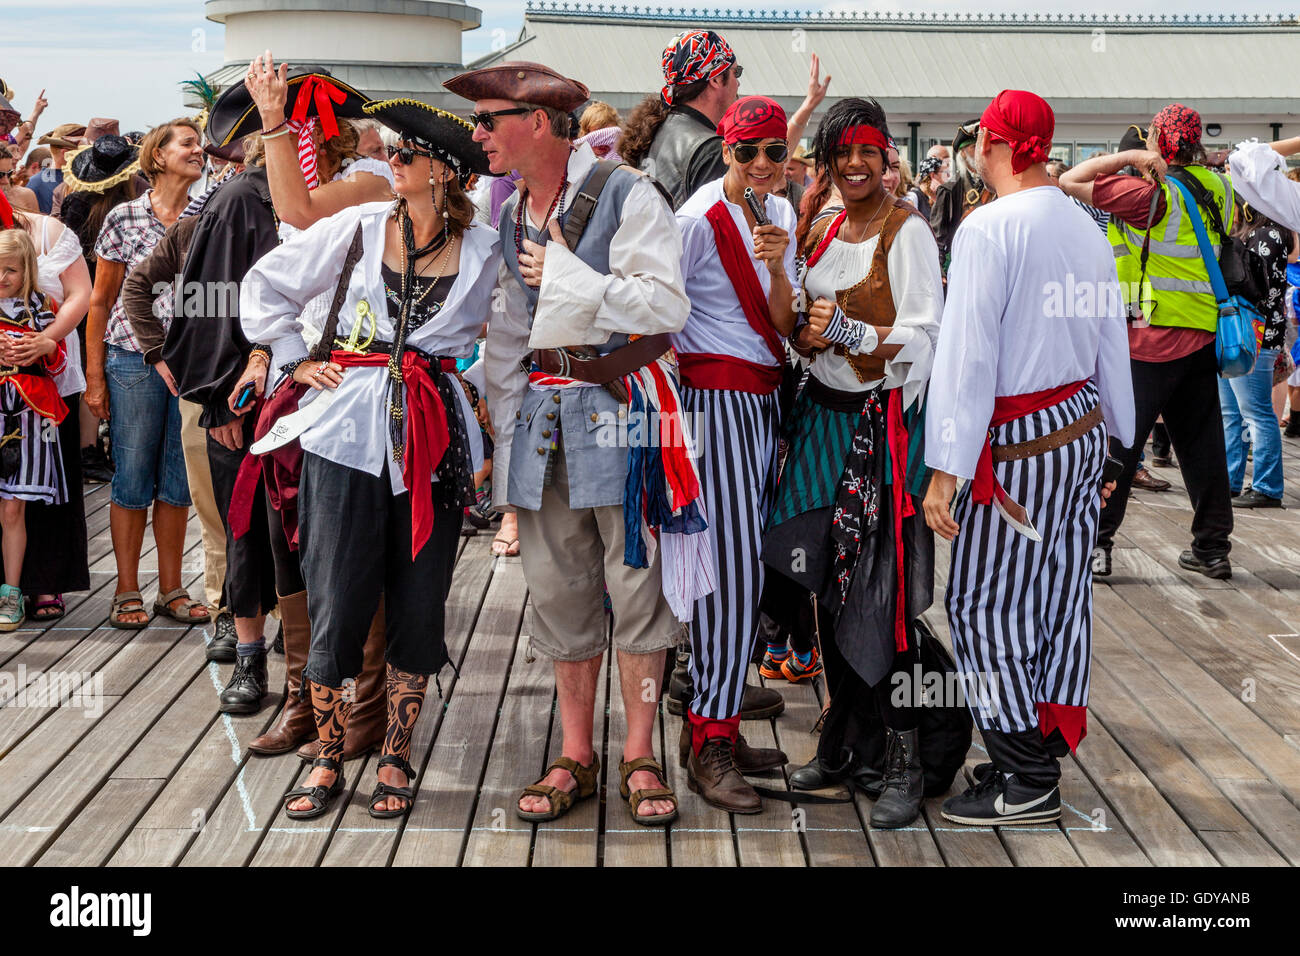 People Dressed In Pirate Costumes Pose For A Group Photo On Hastings Pier  During The Hastings Pirate Day Festival, Hastings, UK Stock Photo - Alamy